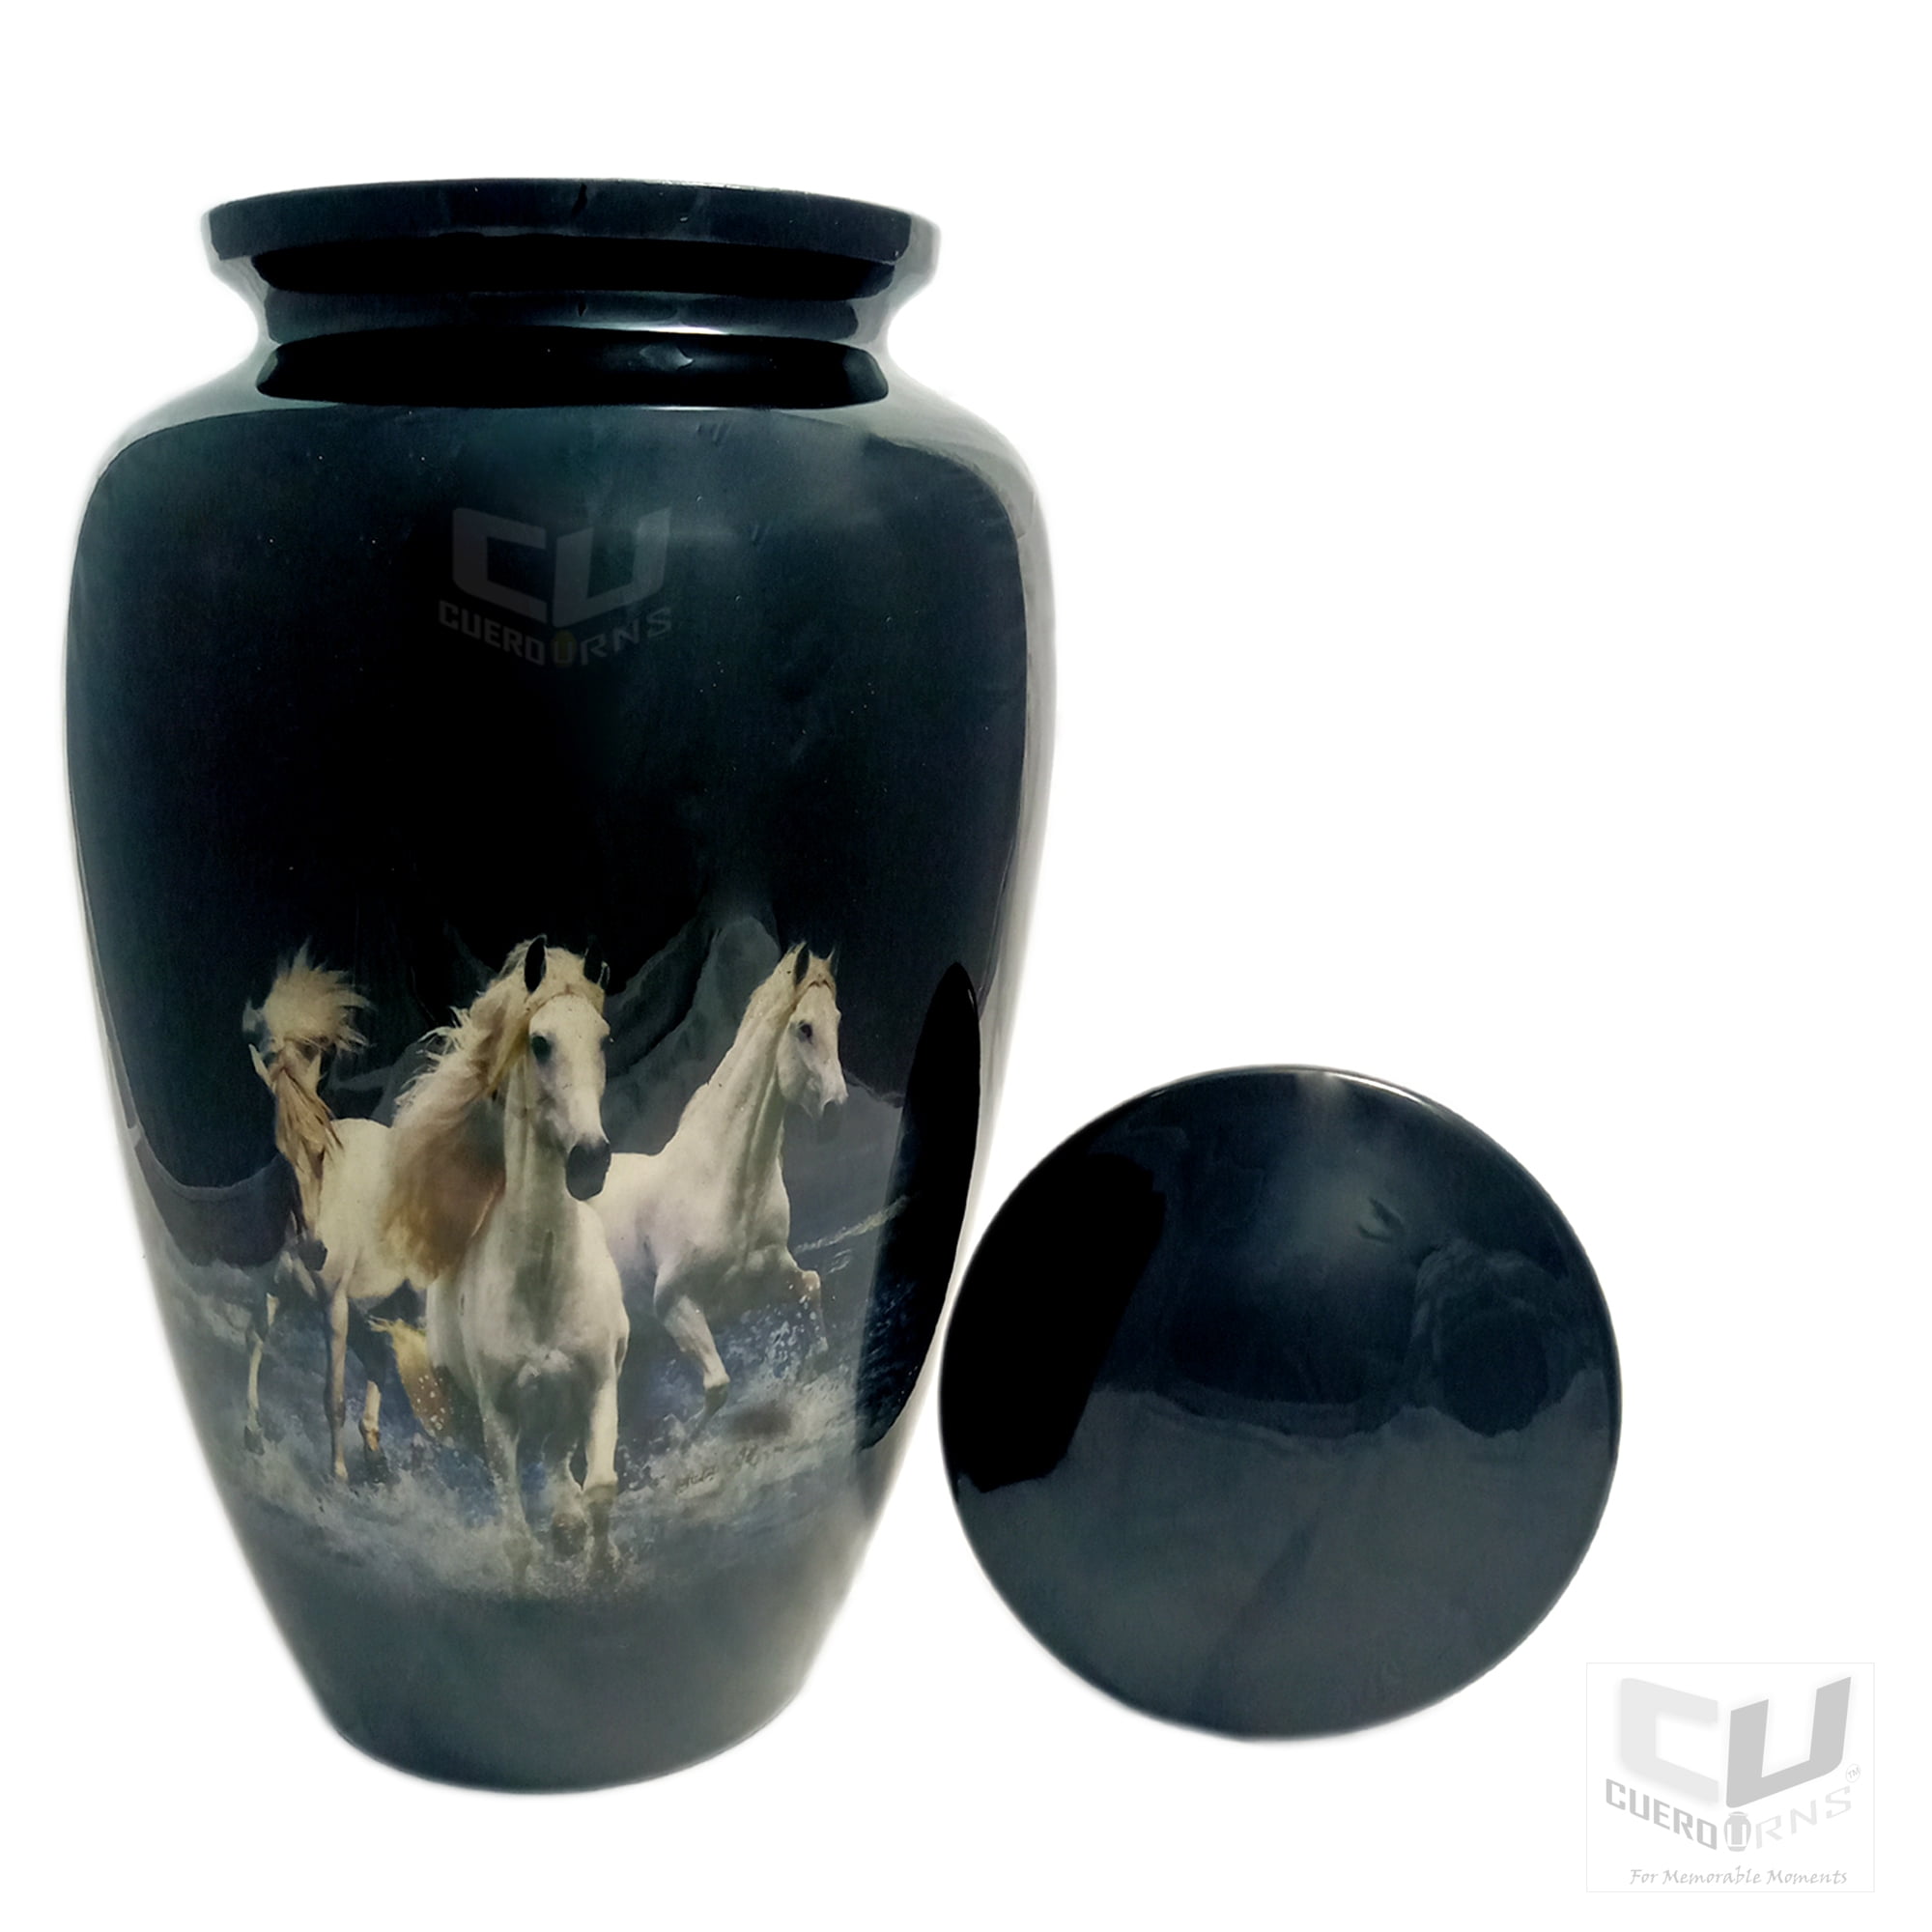 – 10.5 x 6 “, Lovely Horse Cremation Urn CUERO URNS – Lovely Horse Cremation Urn for Human Ashes Adult Adult Funeral Urn Handcrafted 200 lbs Affordable Urn for Ashes 